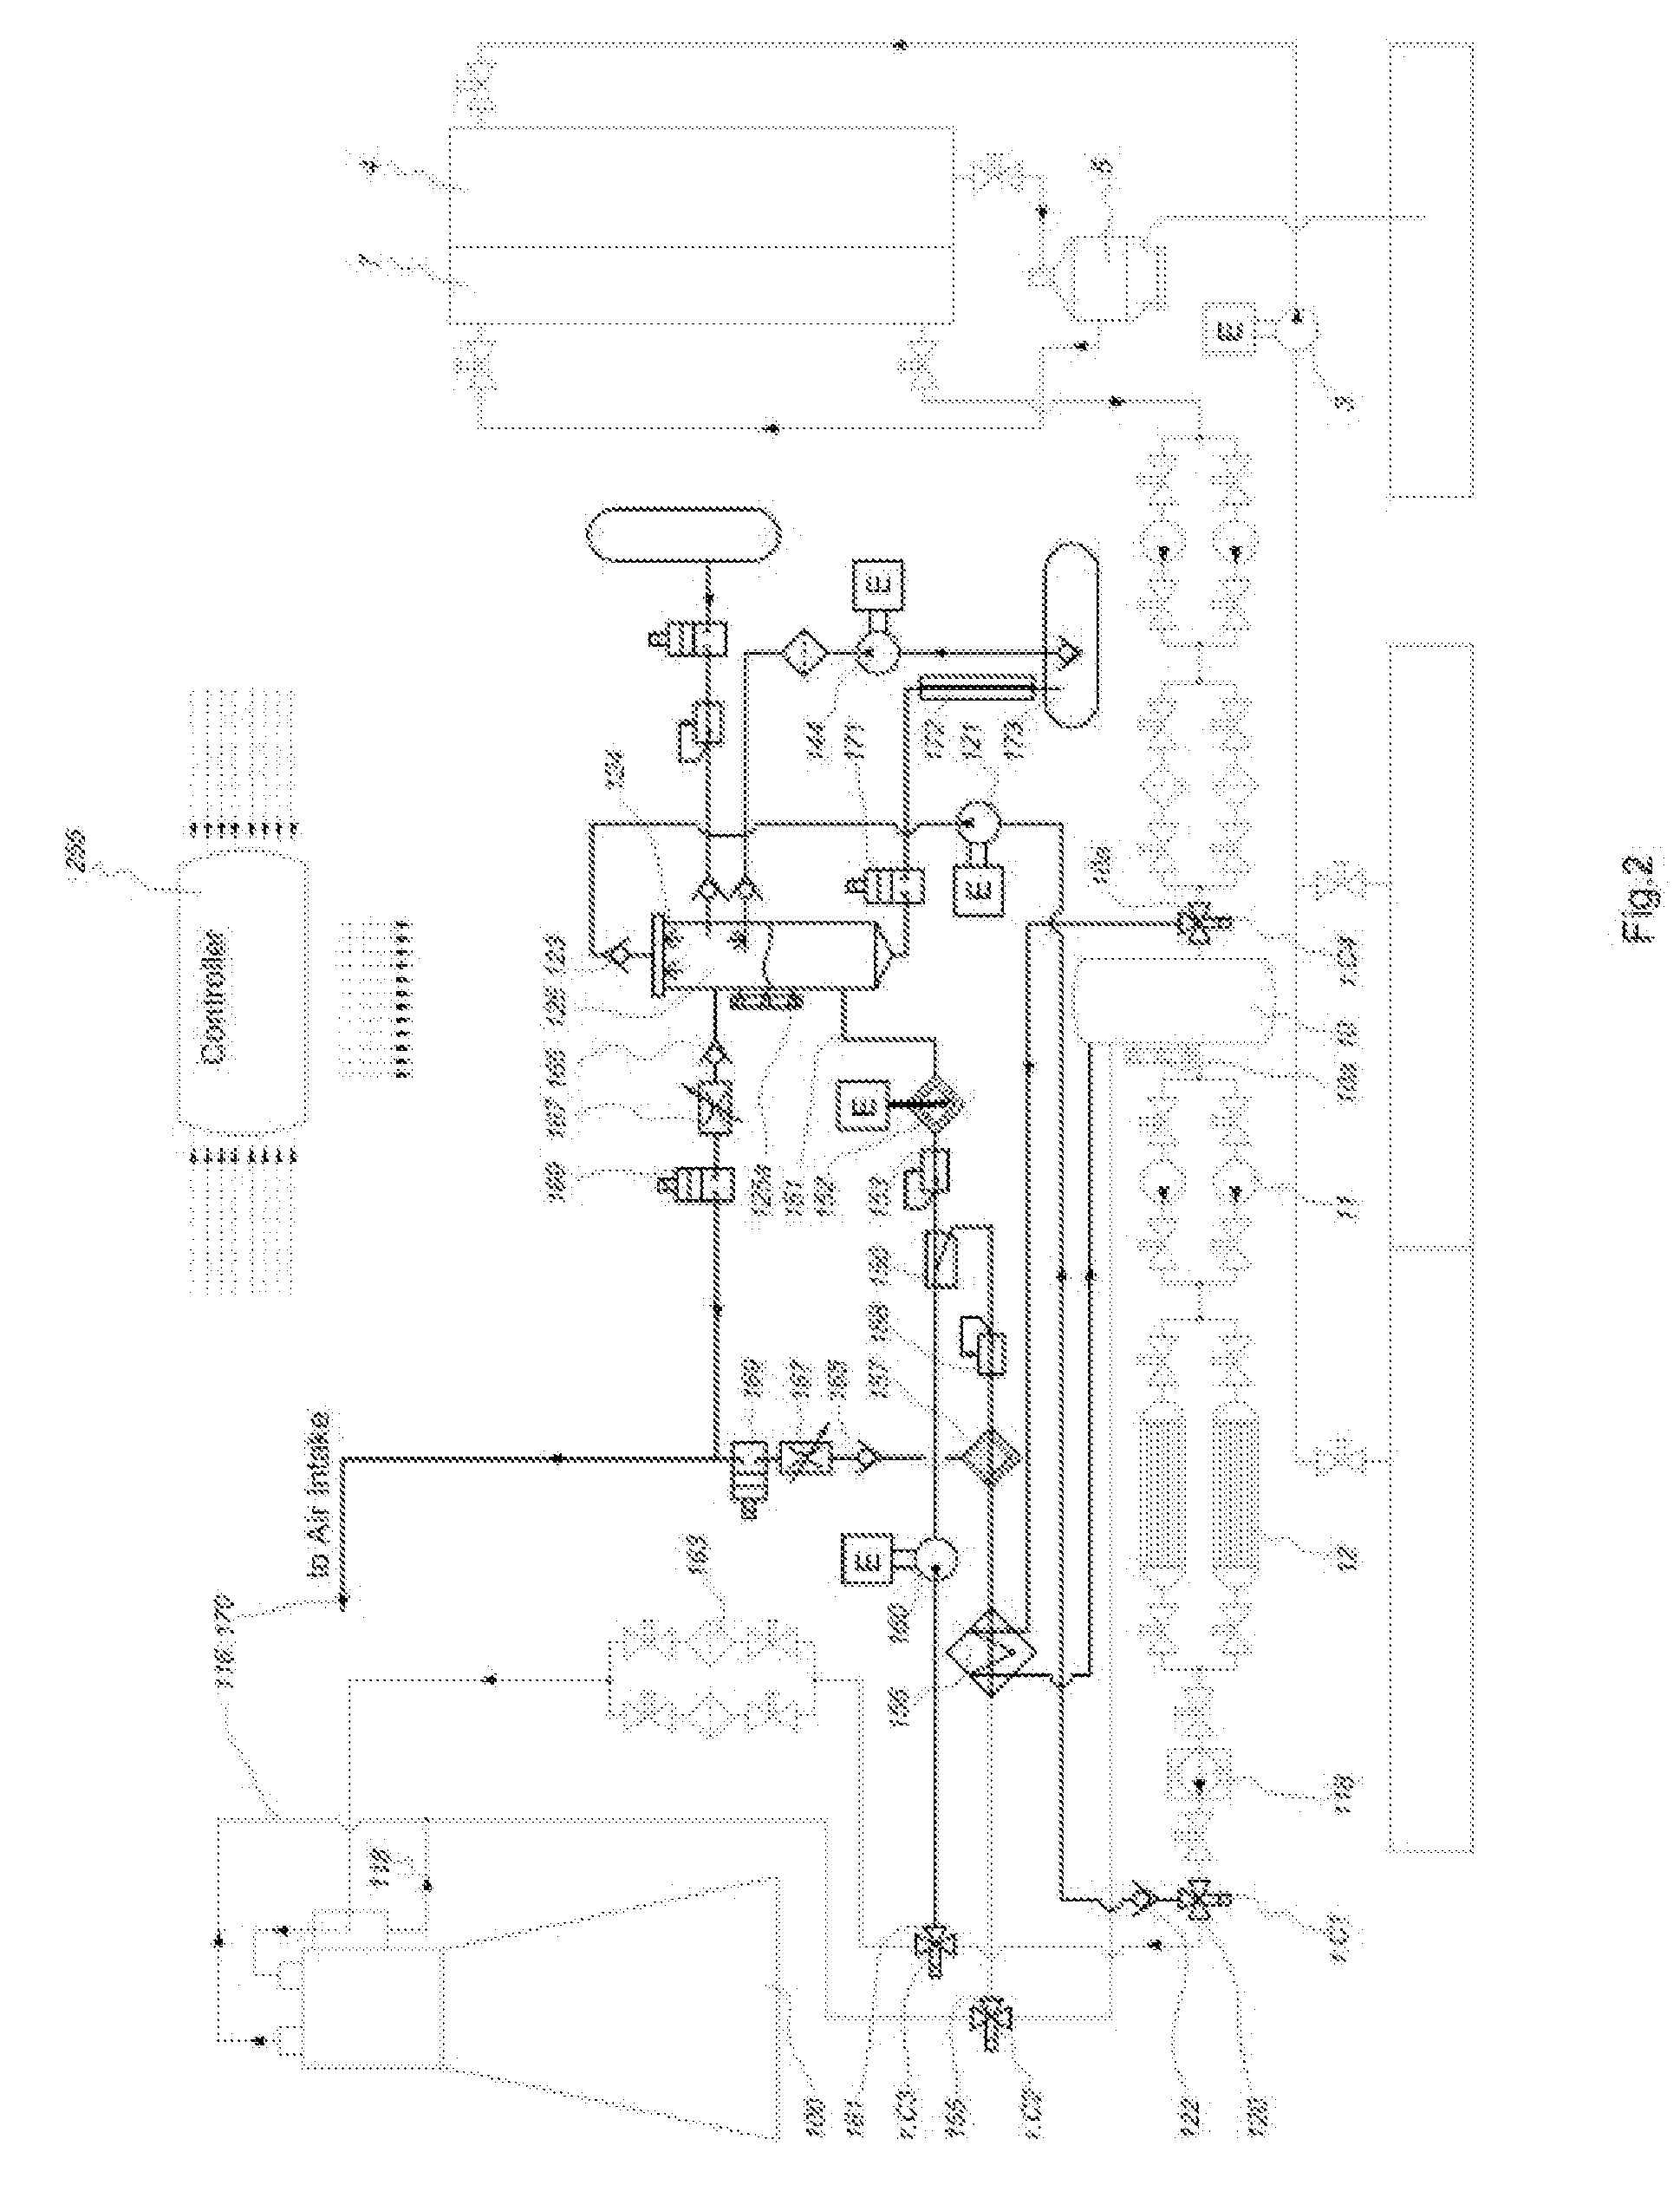 Method and system to improve atomization and combustion of heavy fuel oils